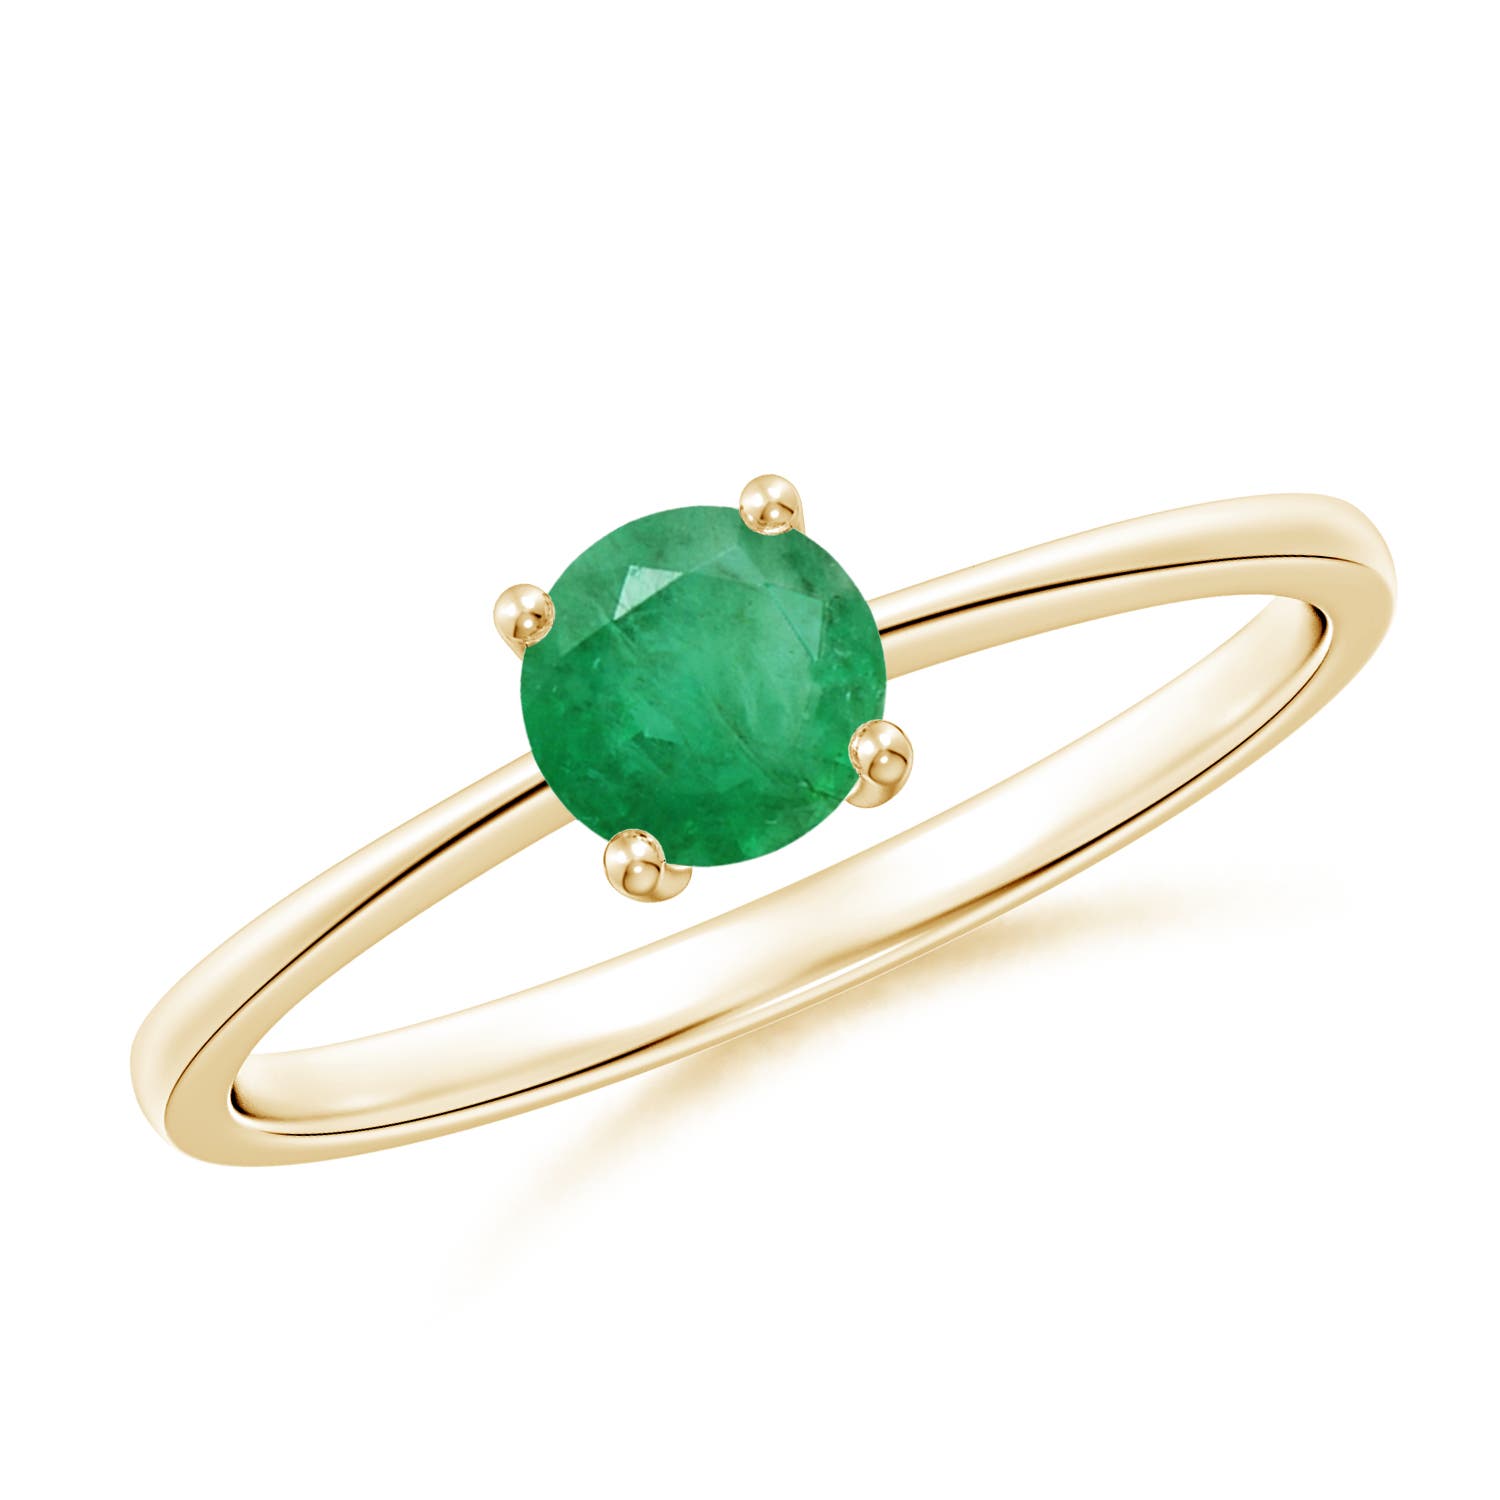 A - Emerald / 0.45 CT / 14 KT Yellow Gold